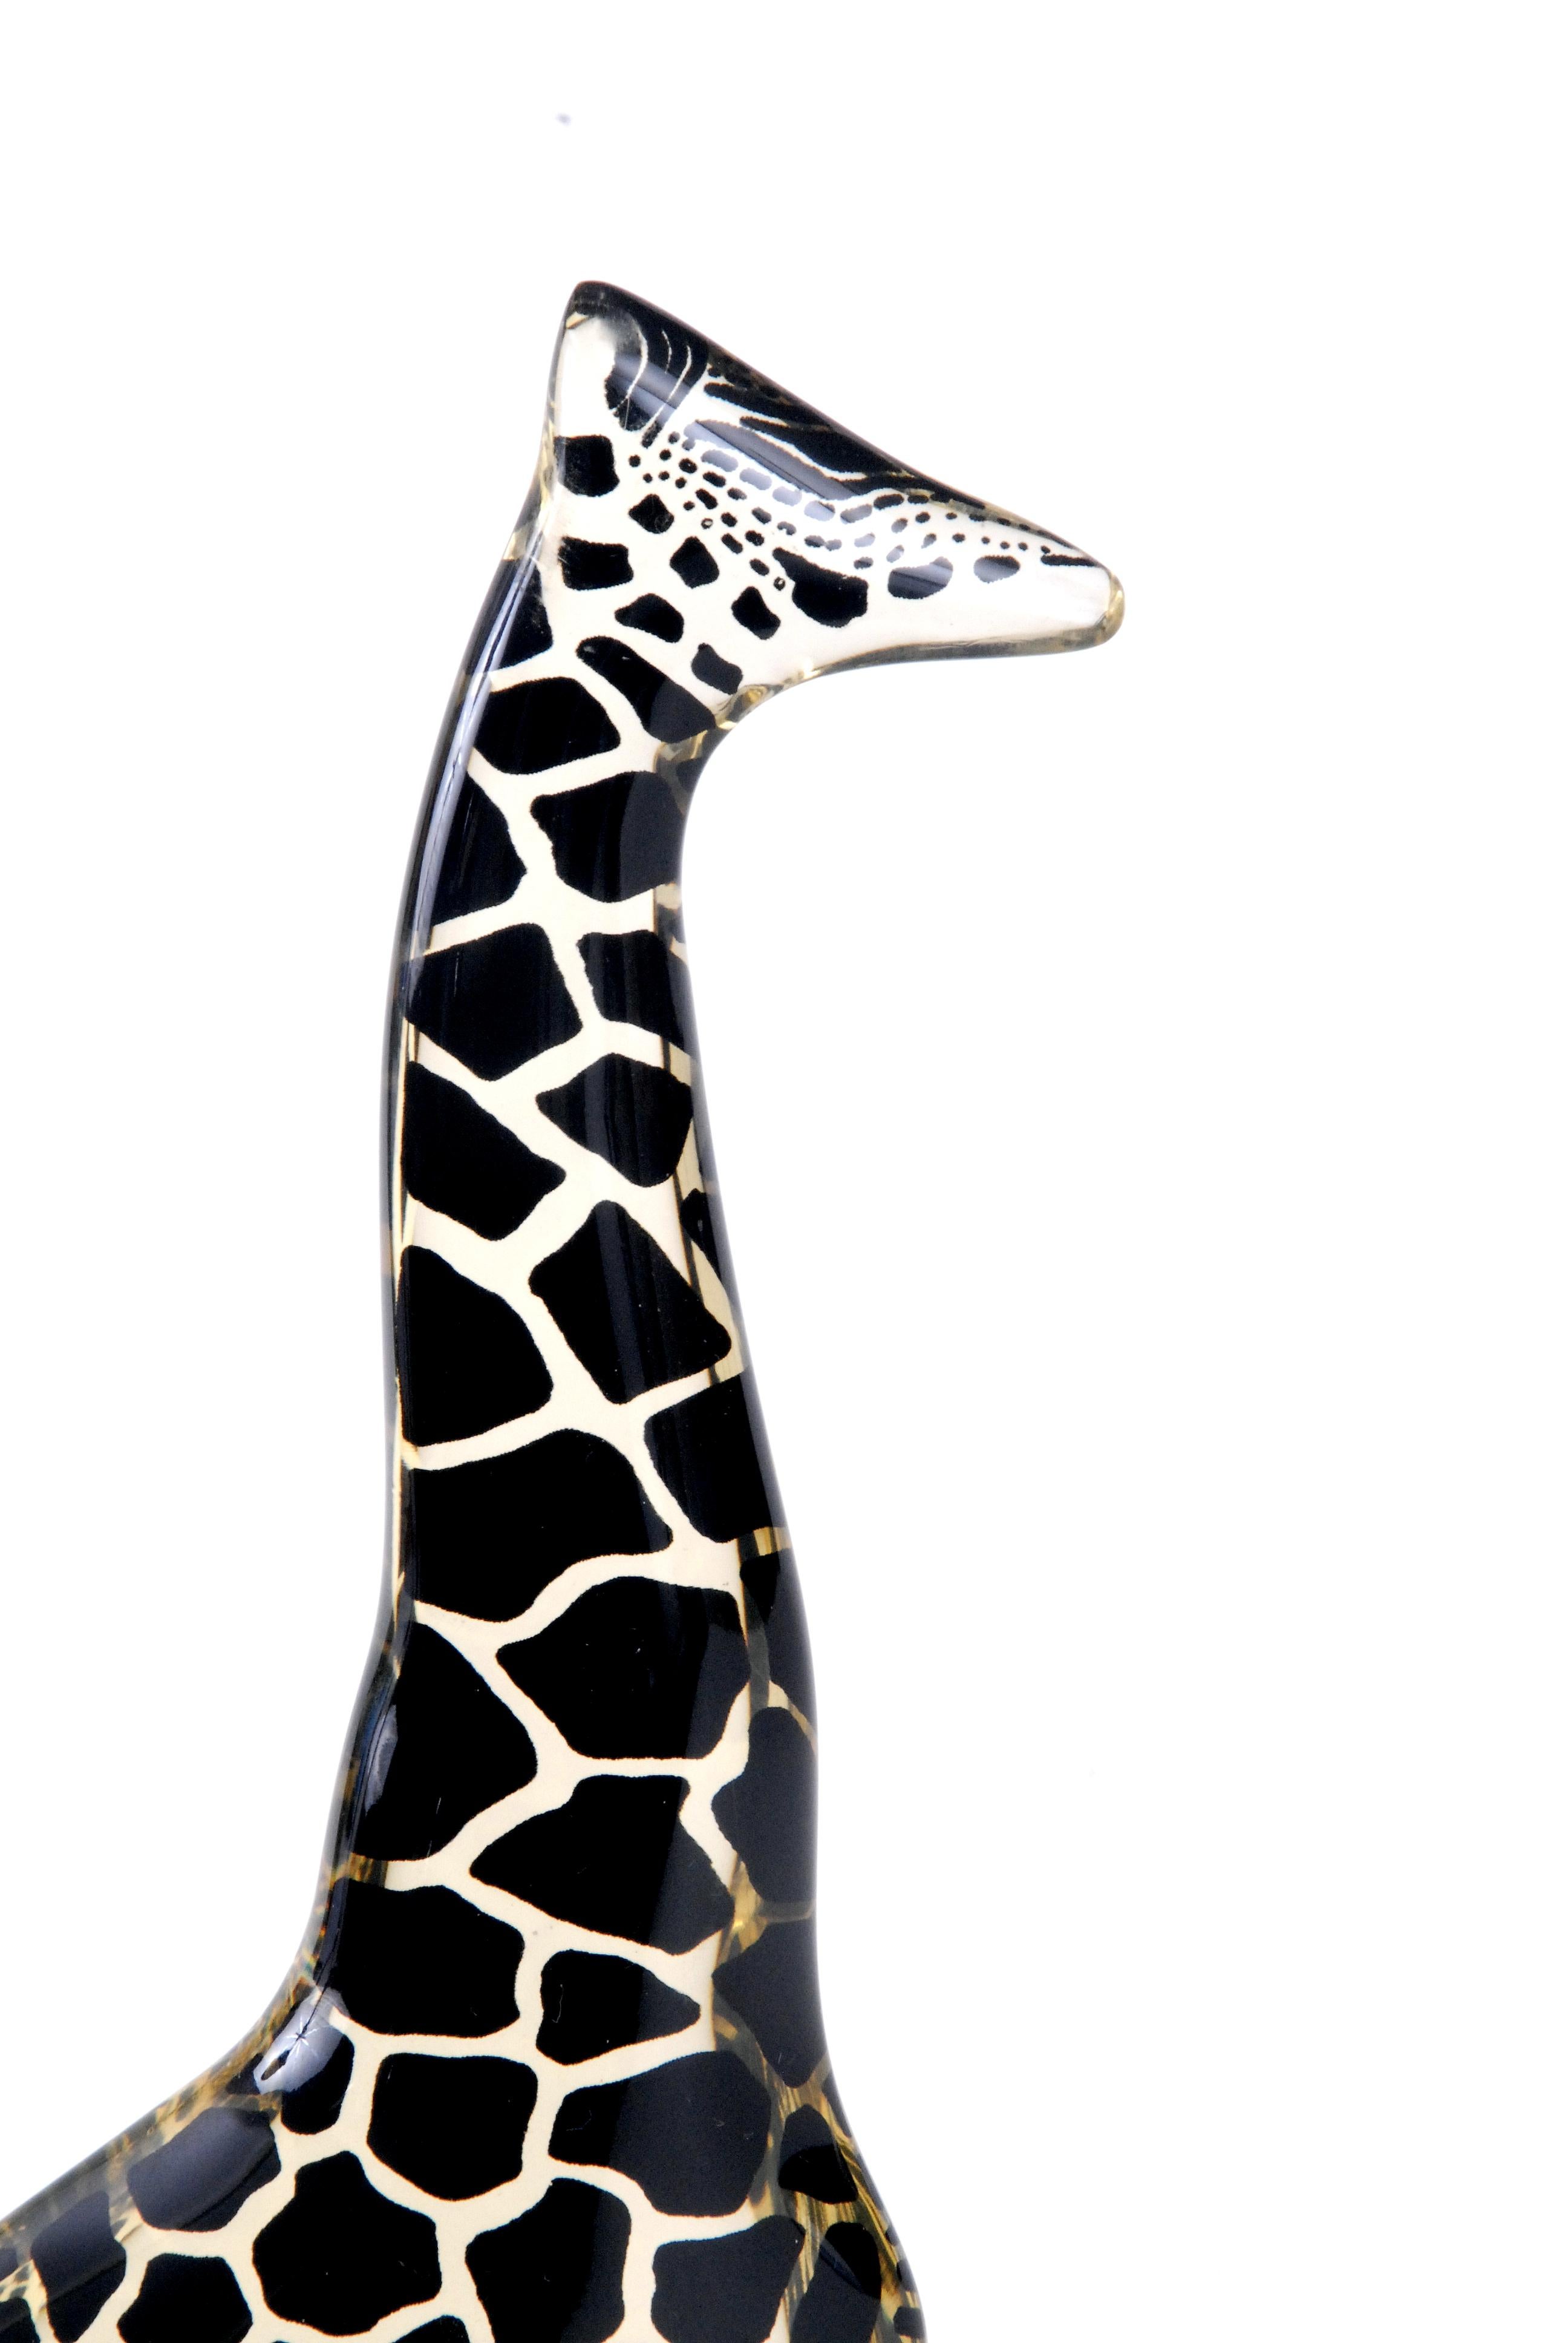 A medium sized black giraffe in perfect condition with its label still attached, last photo shows comparison between the 2 giraffes listed for sale.
This one is 21.5 cm in height.